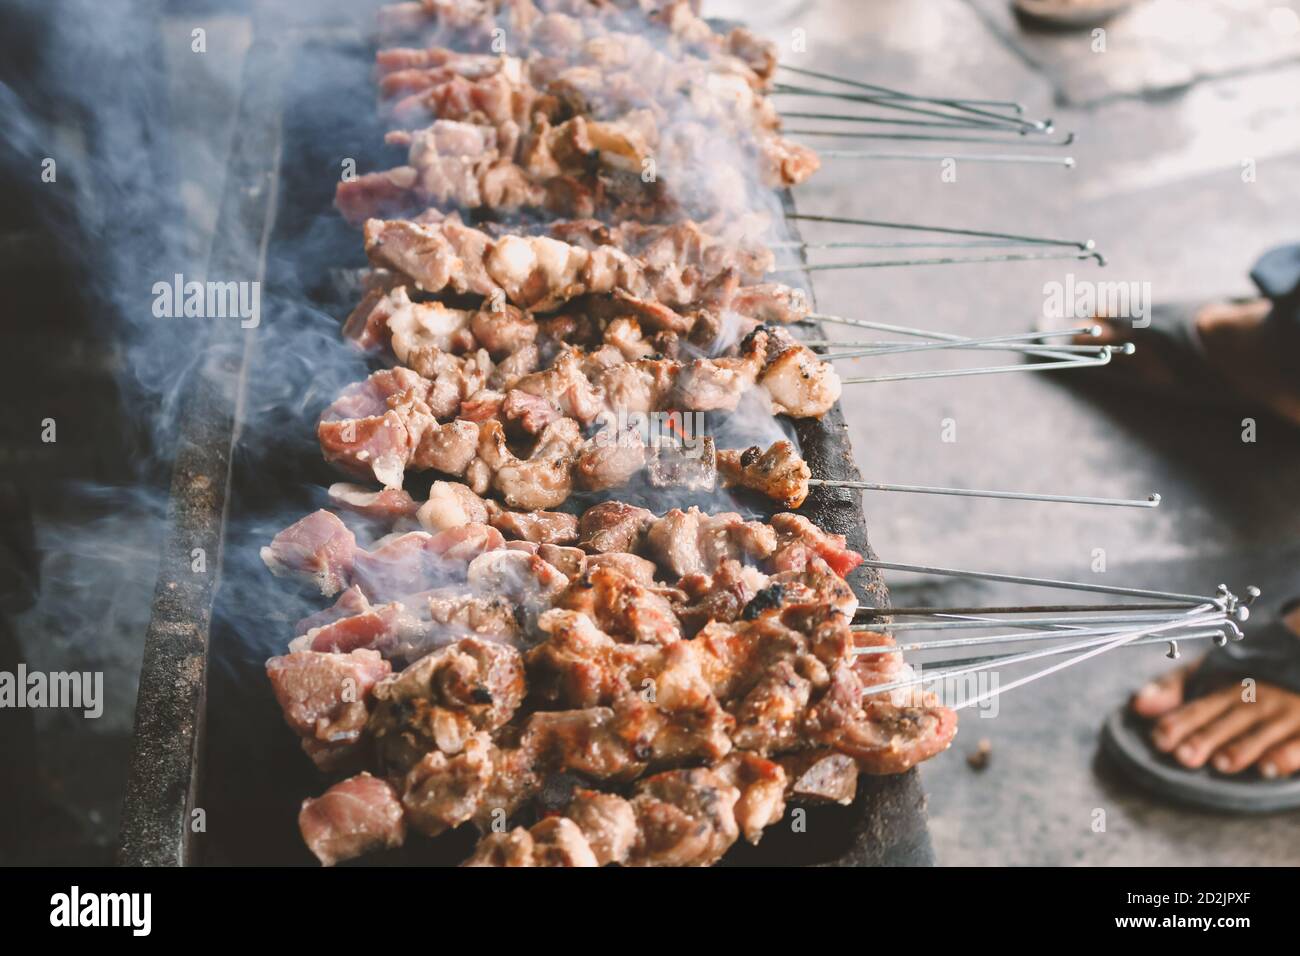 Sate Klatak grilling on charcoal grill. Sate klathak is a unique goat satay or mutton satay dish, originally from Yogyakarta, Indonesia. Stock Photo